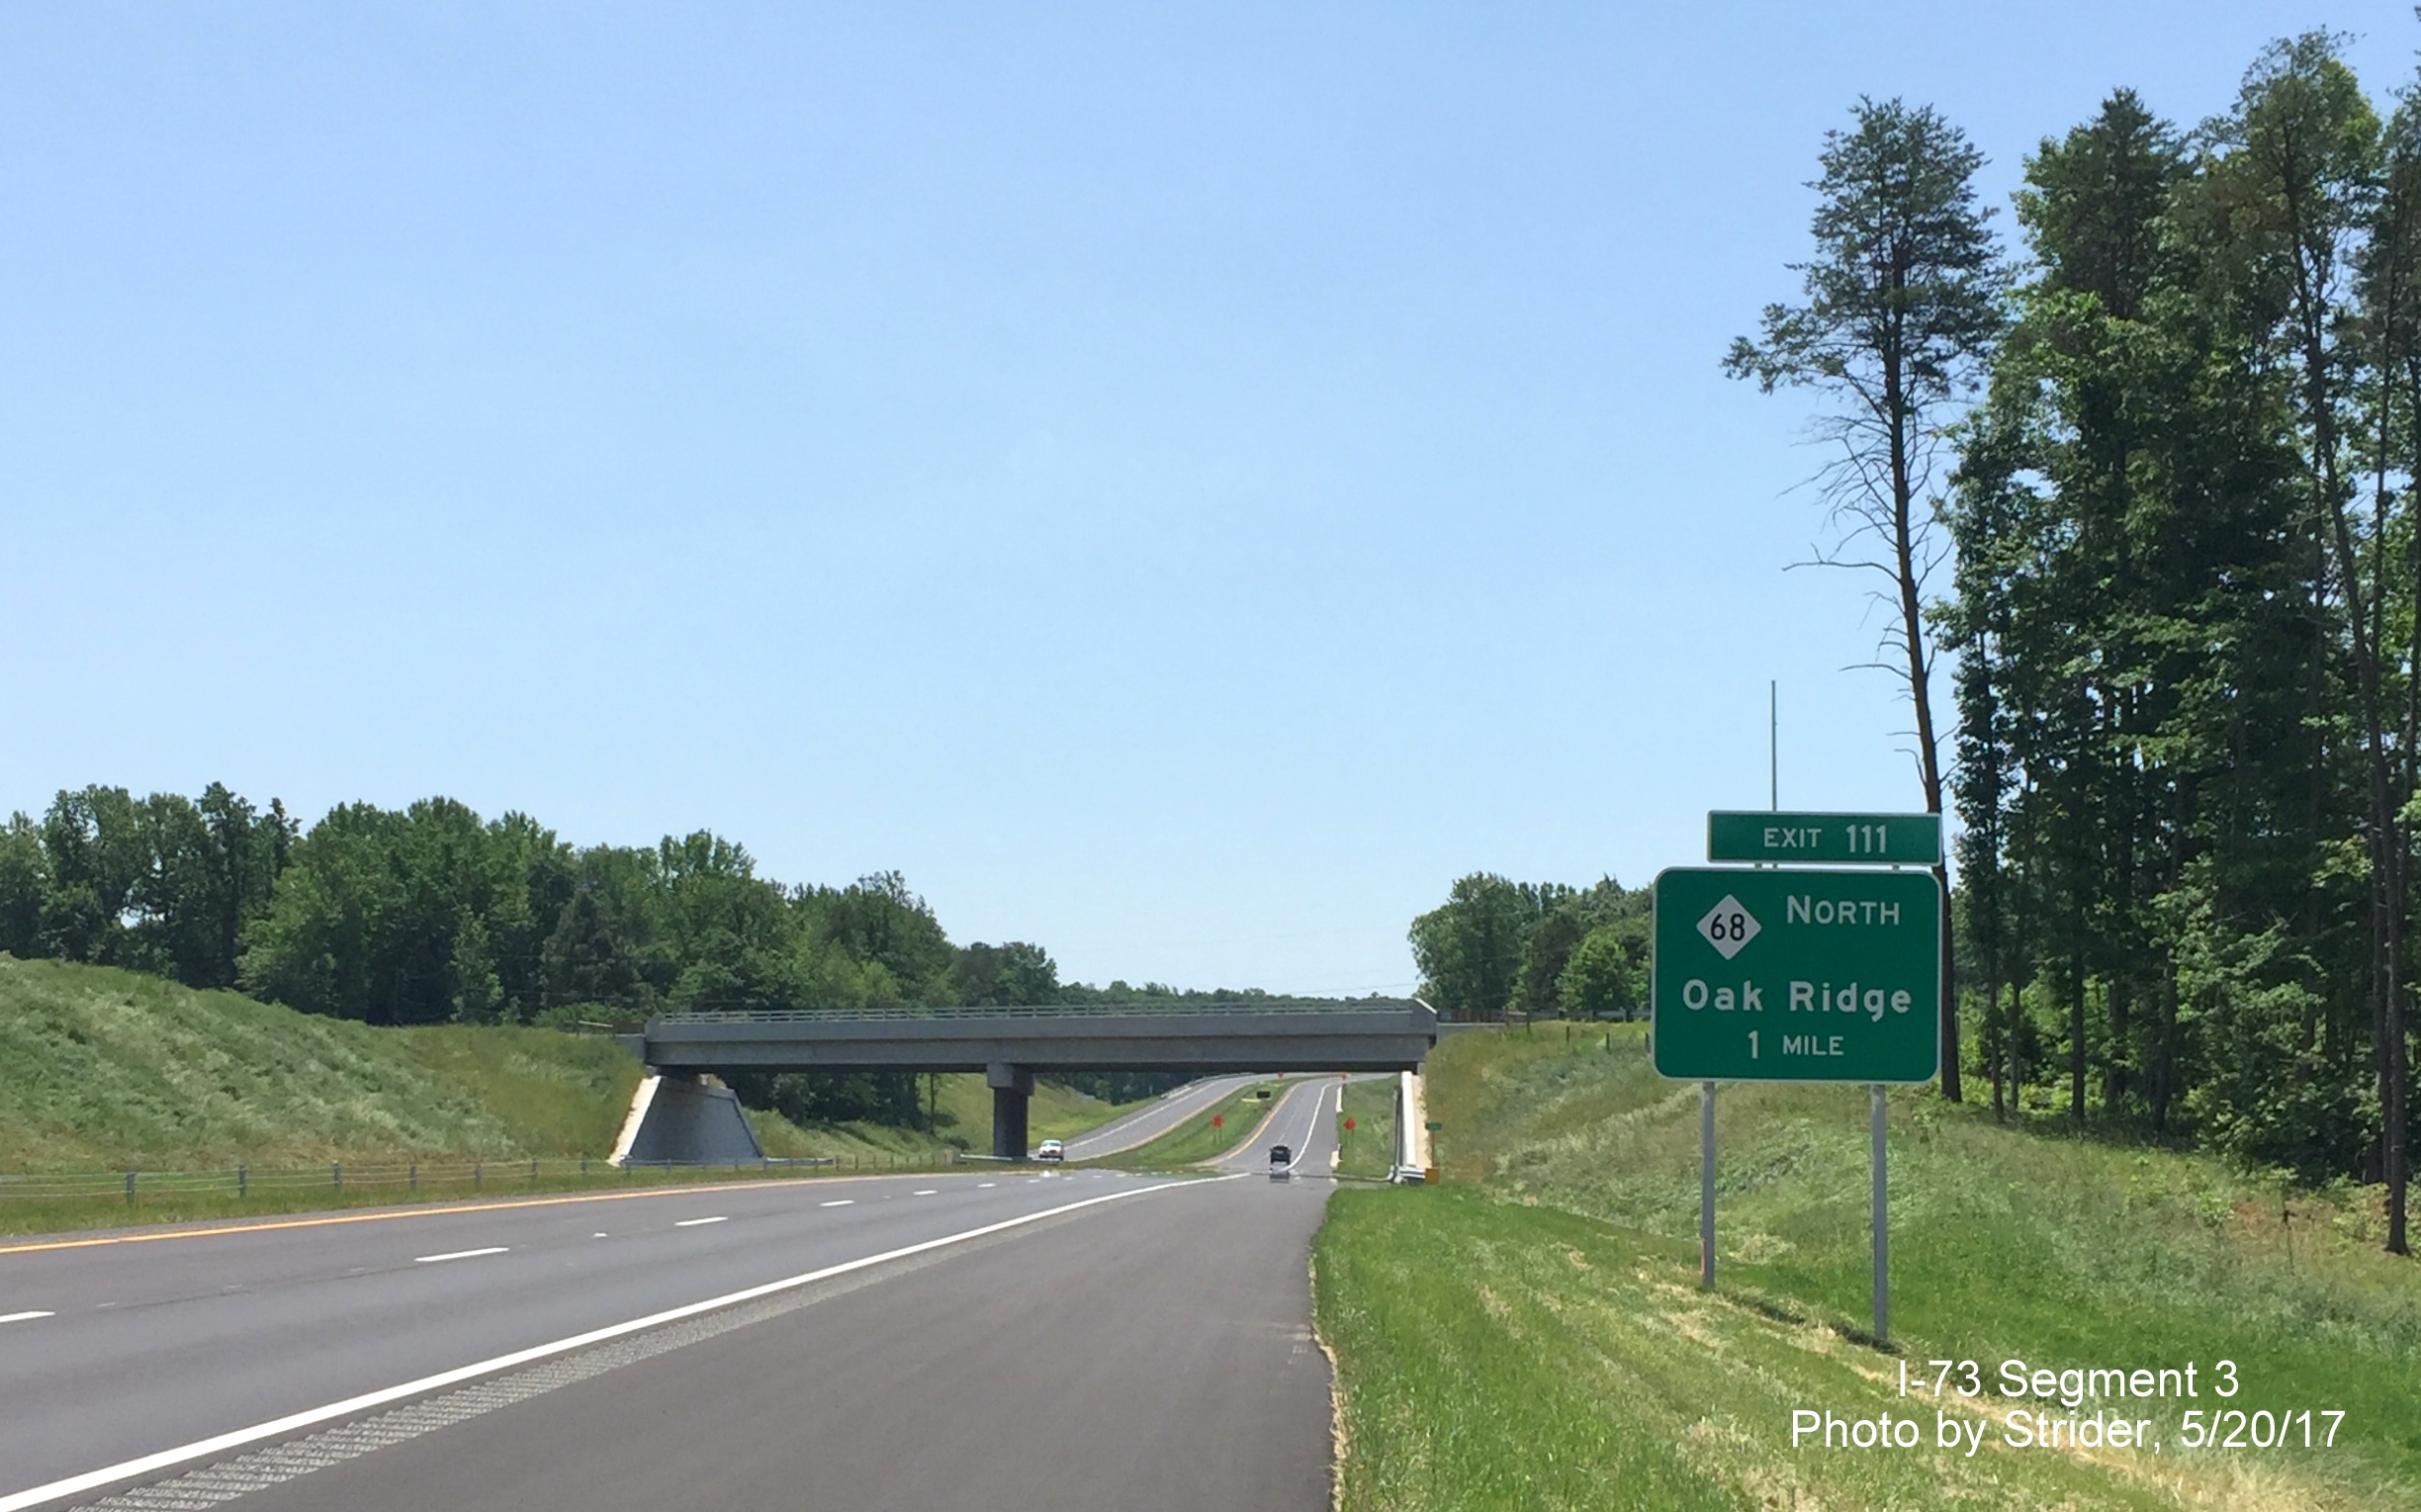 Image taken of 1-Mile Advance sign for NC 68 North exit on newly opened I-73 North highway north of Greensboro, by Strider